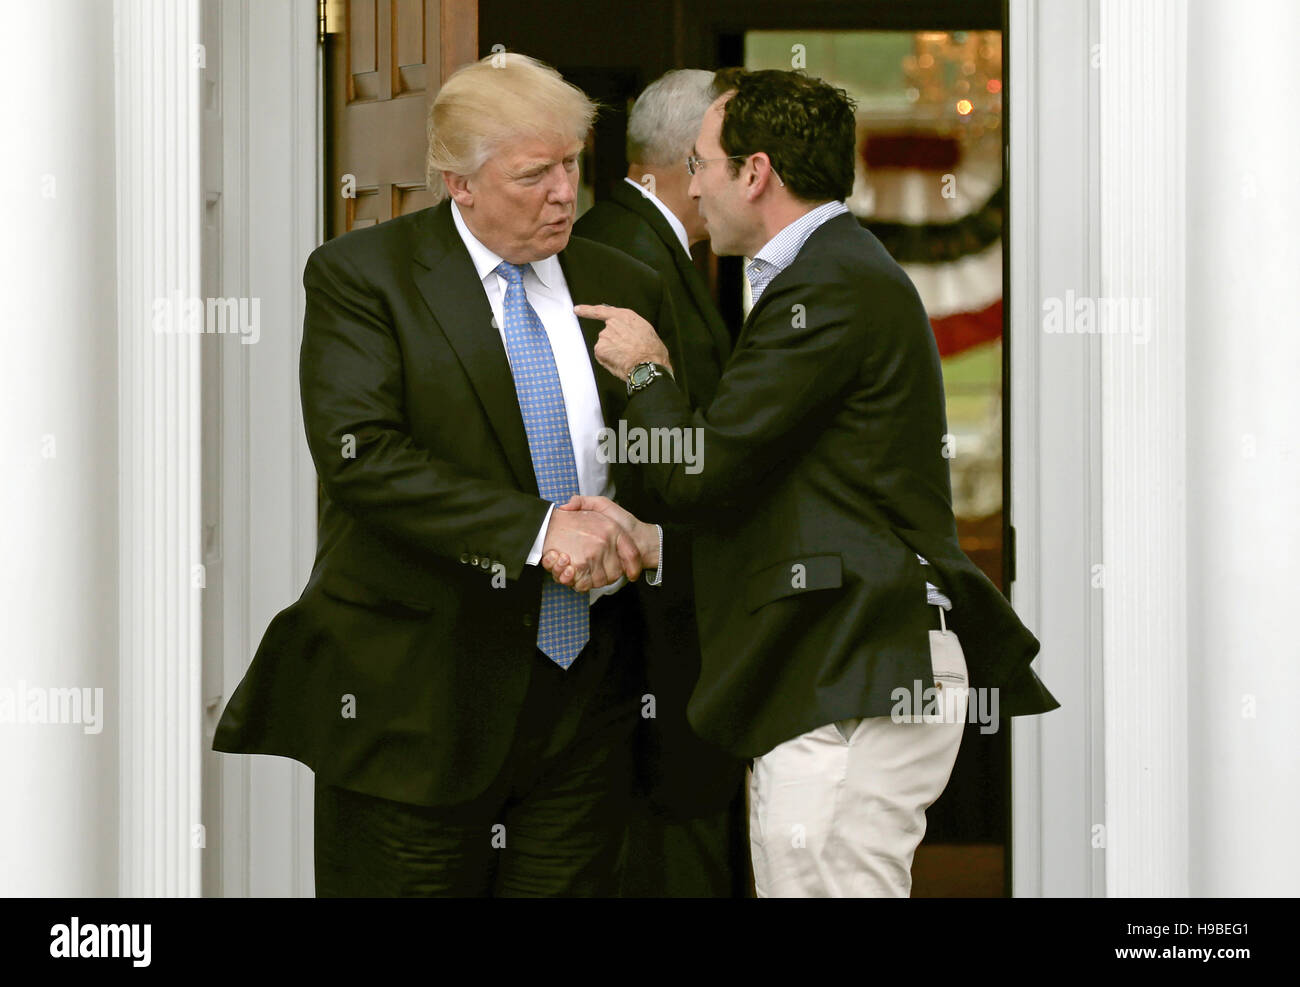 Bedminster Township, New Jersey, USA. 20th Nov, 2016. United States President-elect Donald Trump (L) shakes hands with Jonathan Gray at the clubhouse of Trump International Golf Club, in Bedminster Township, New Jersey, USA, 20 November 2016. Credit: Peter Foley/Pool via CNP - NO WIRE SERVICE - Credit:  dpa/Alamy Live News Stock Photo